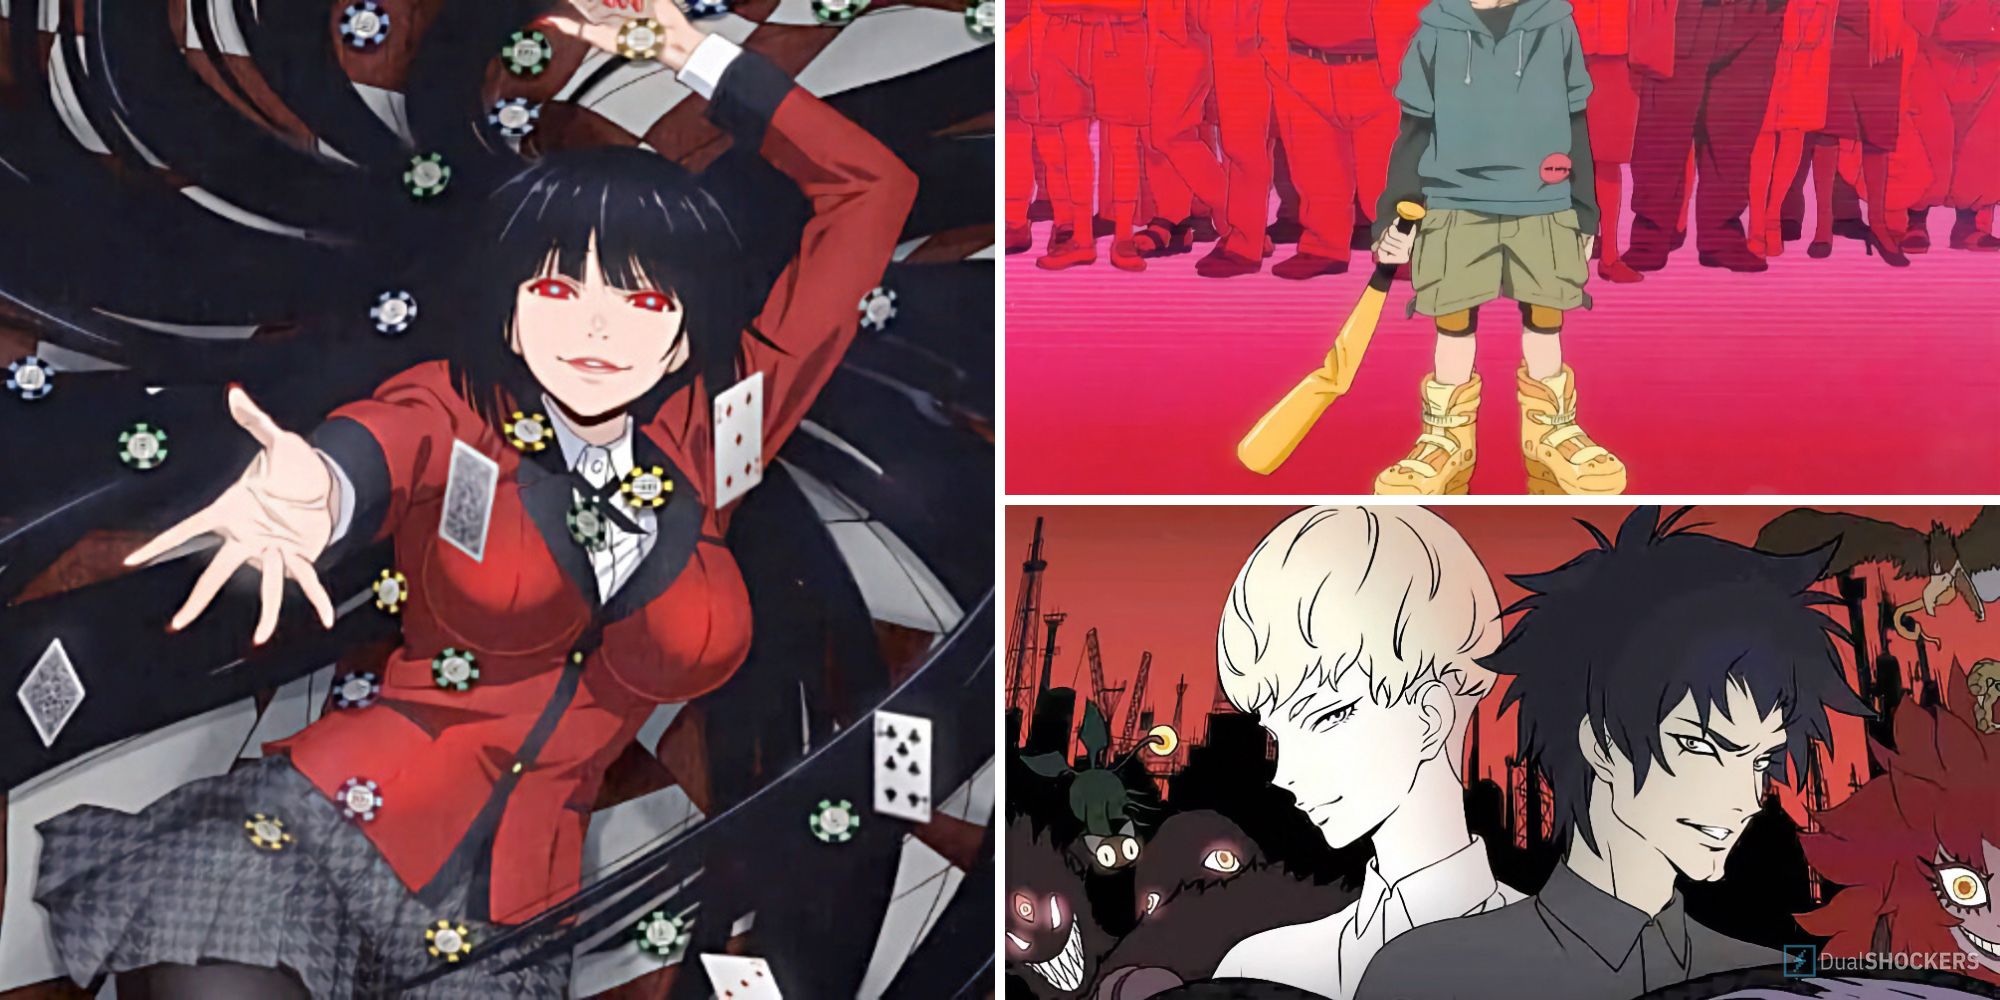 Pin by M.c on Anime  Death parade, Hottest anime characters, Anime shows